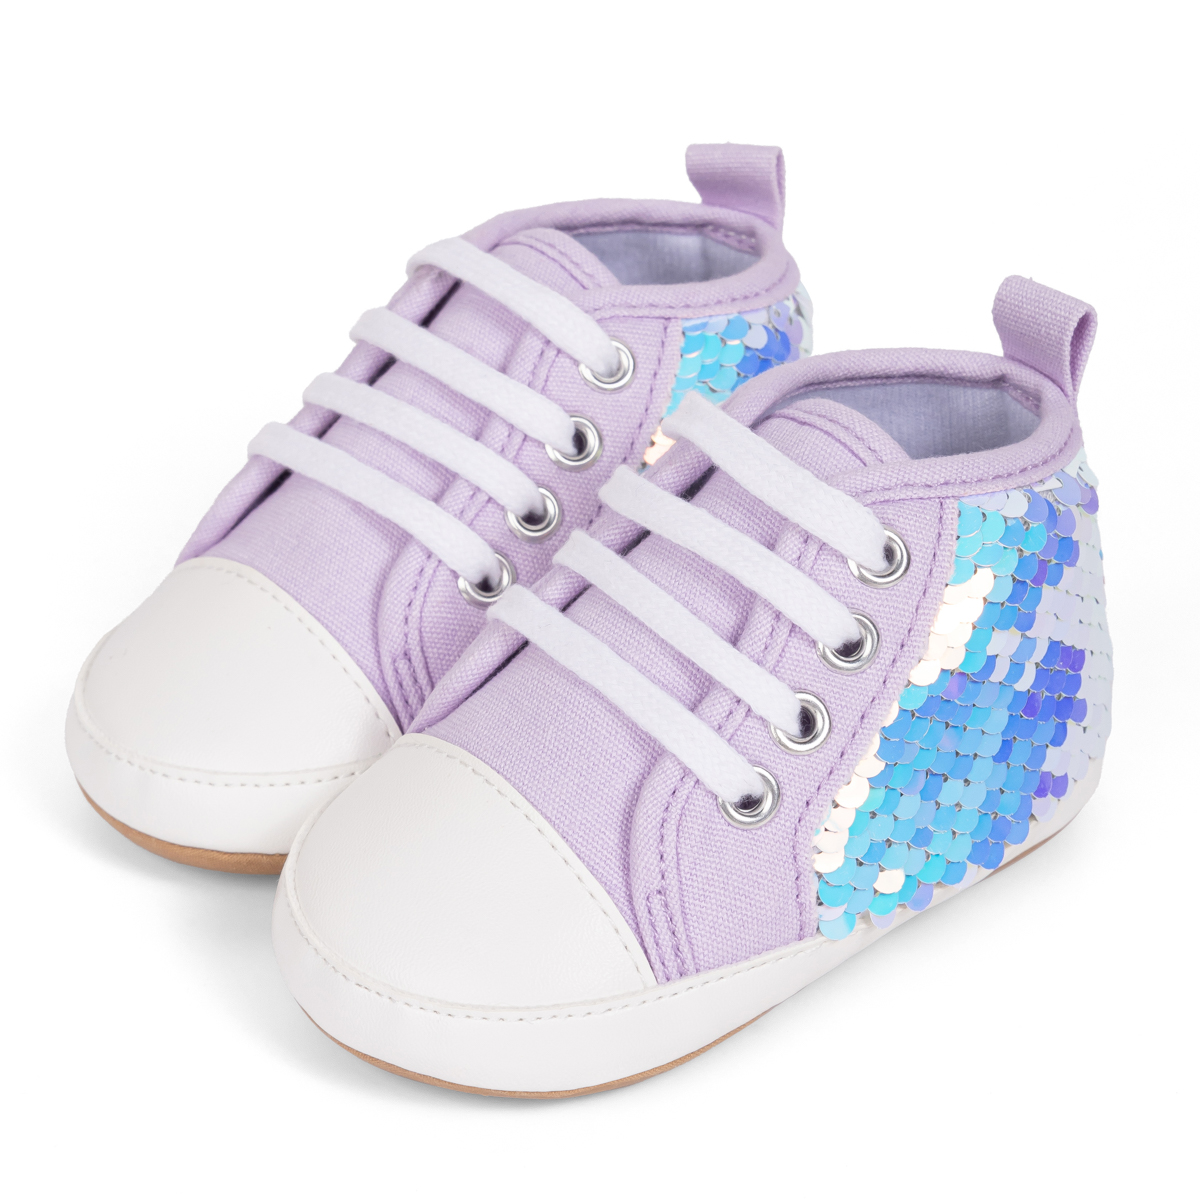 PU Upper Non Slip Baby Casual Shoes